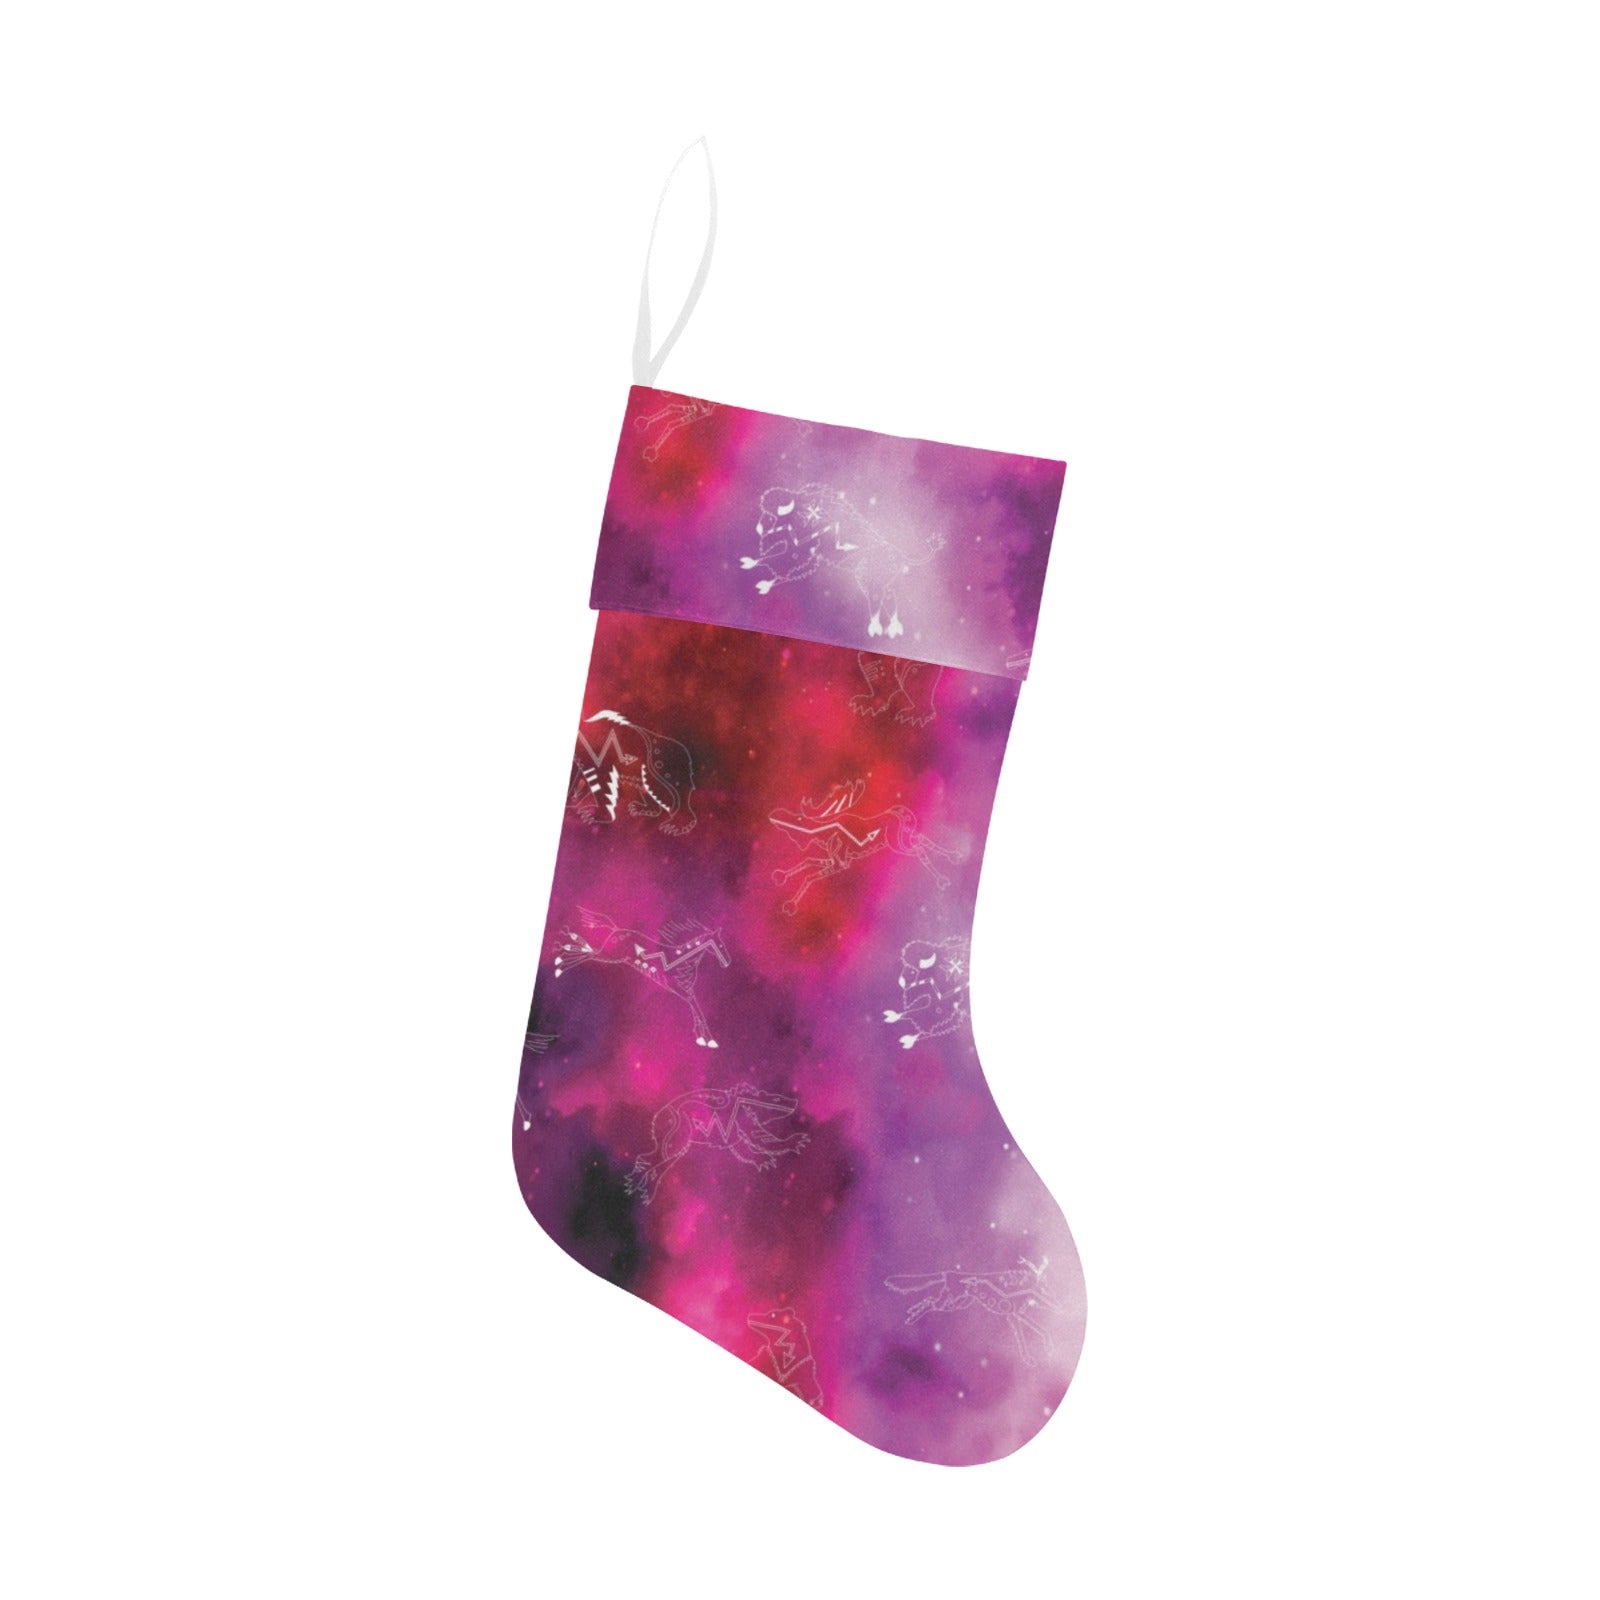 Animal Ancestors 8 Gaseous Clouds Pink and Red Christmas Stocking